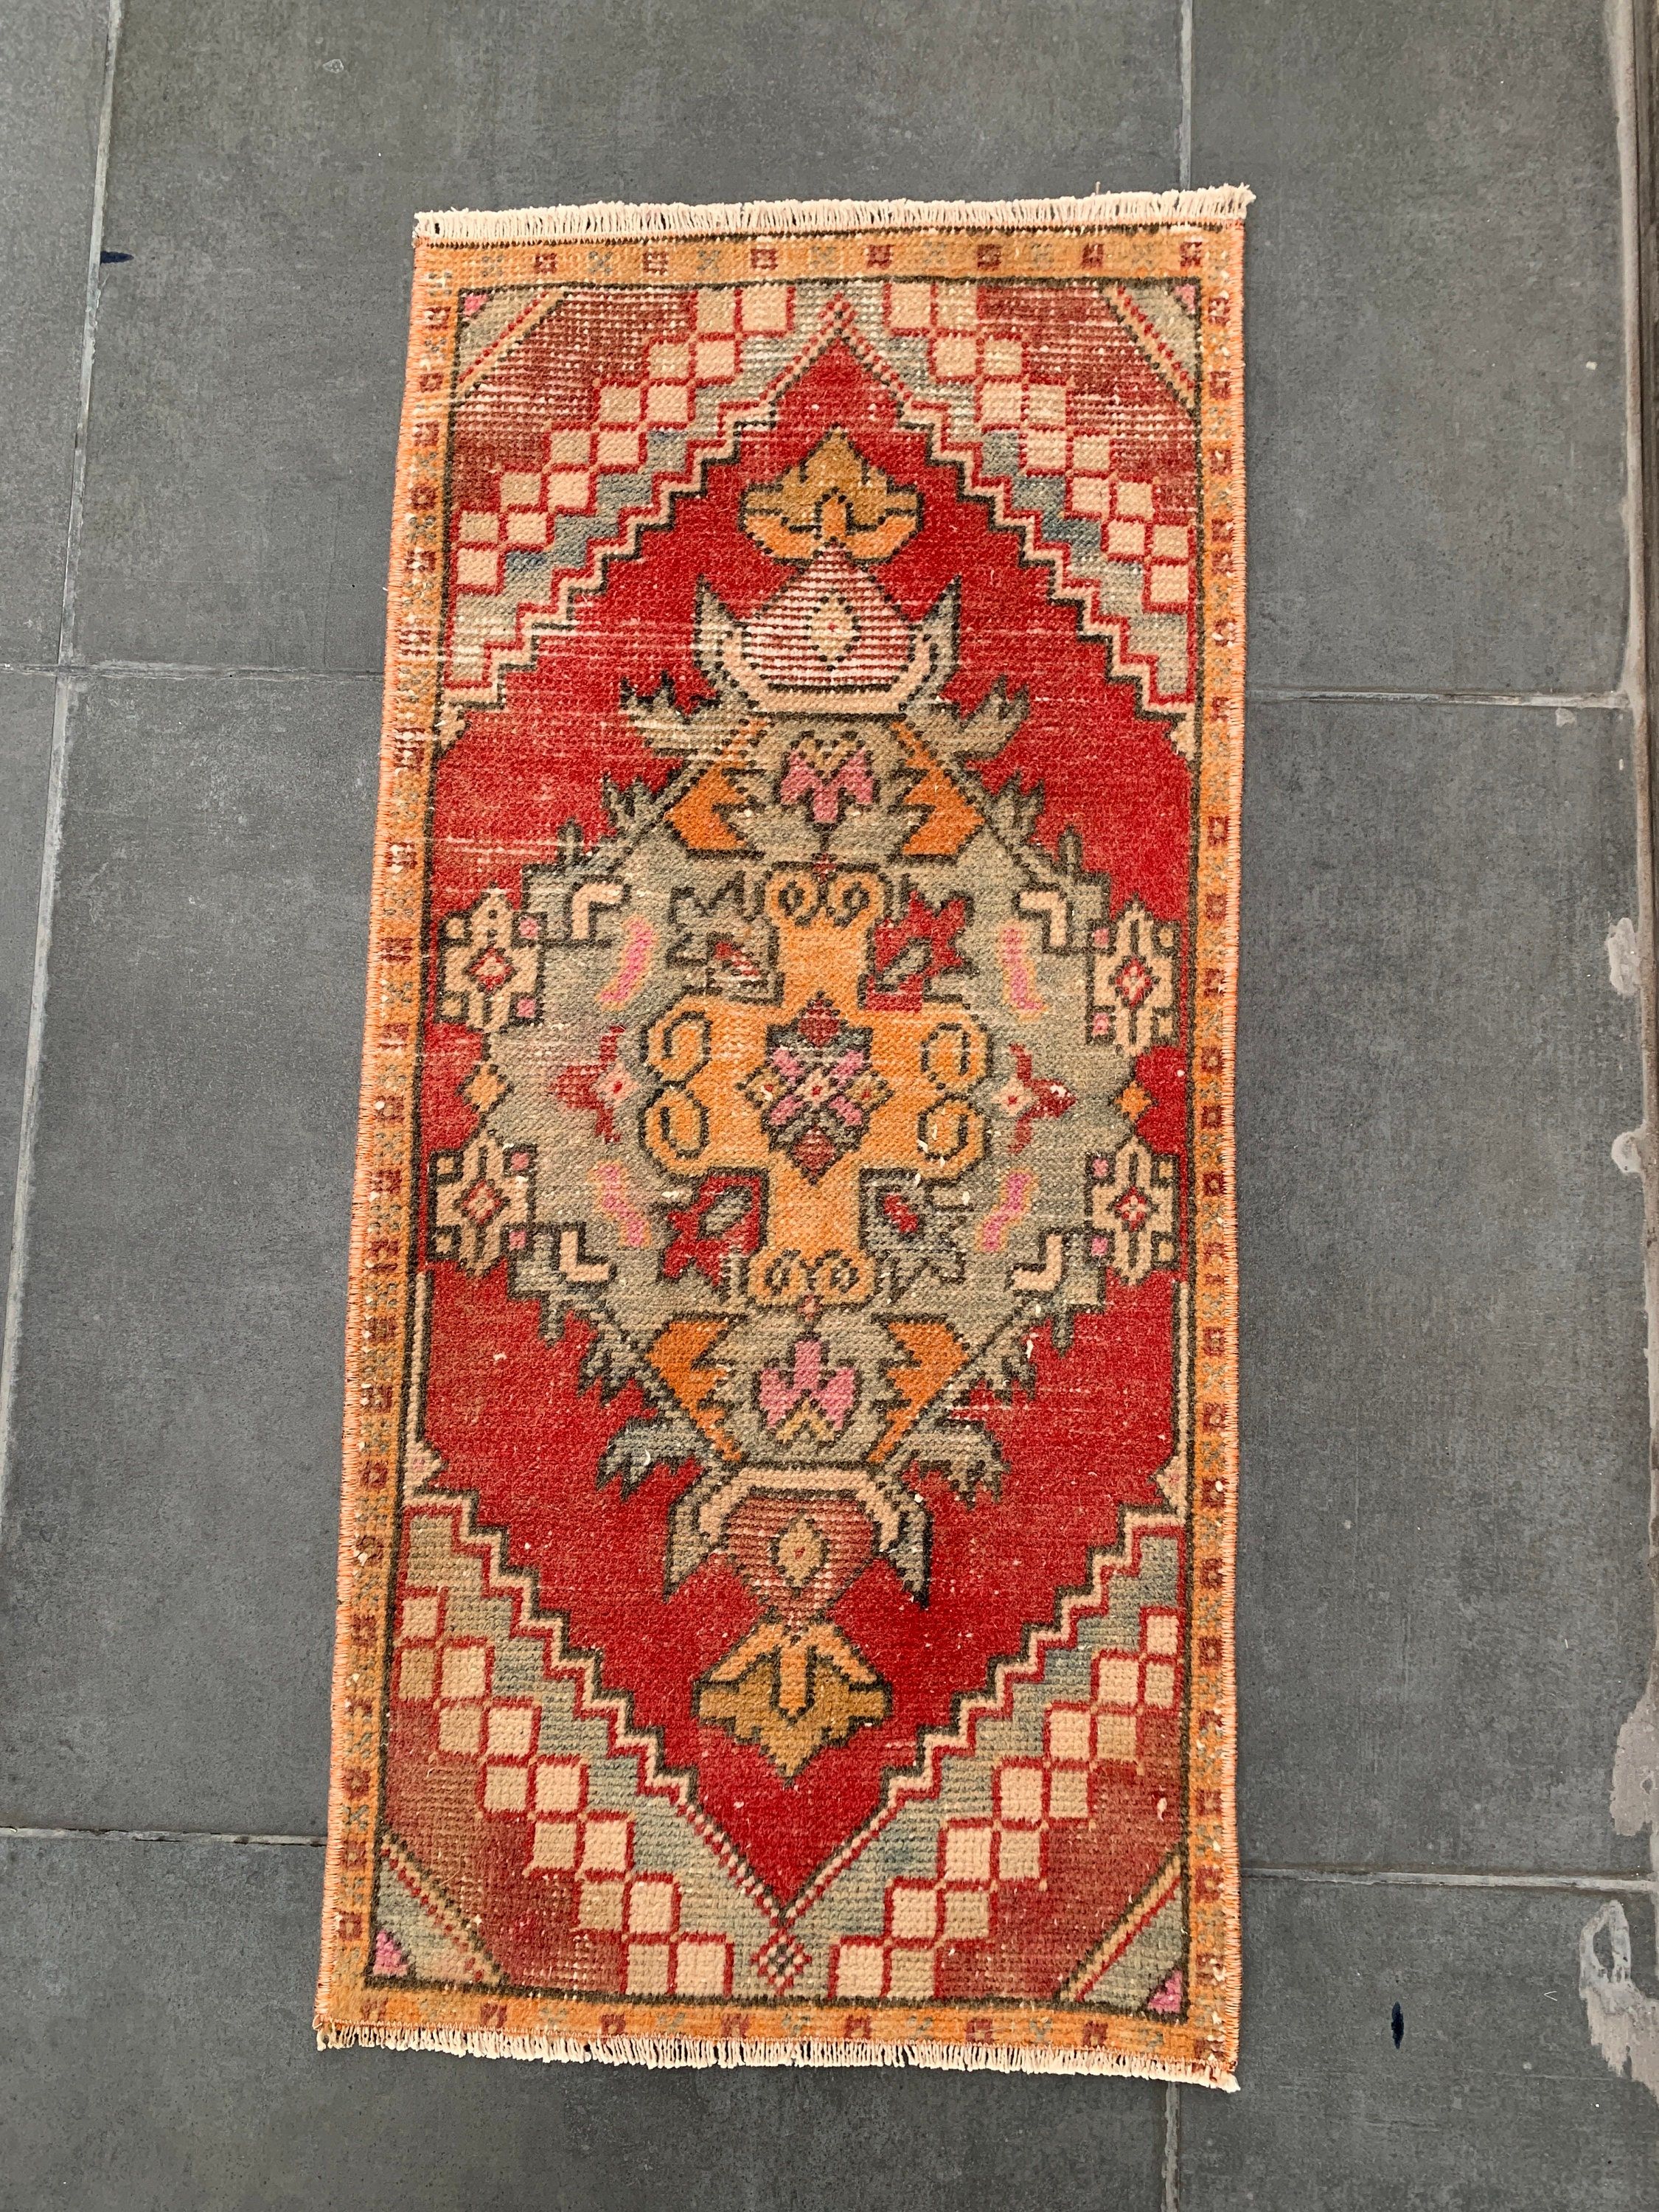 Bedroom Rugs, Moroccan Rugs, Rugs for Car Mat, Vintage Rug, Nomadic Rug, 1.5x3.1 ft Small Rug, Bath Rugs, Turkish Rugs, Red Home Decor Rugs